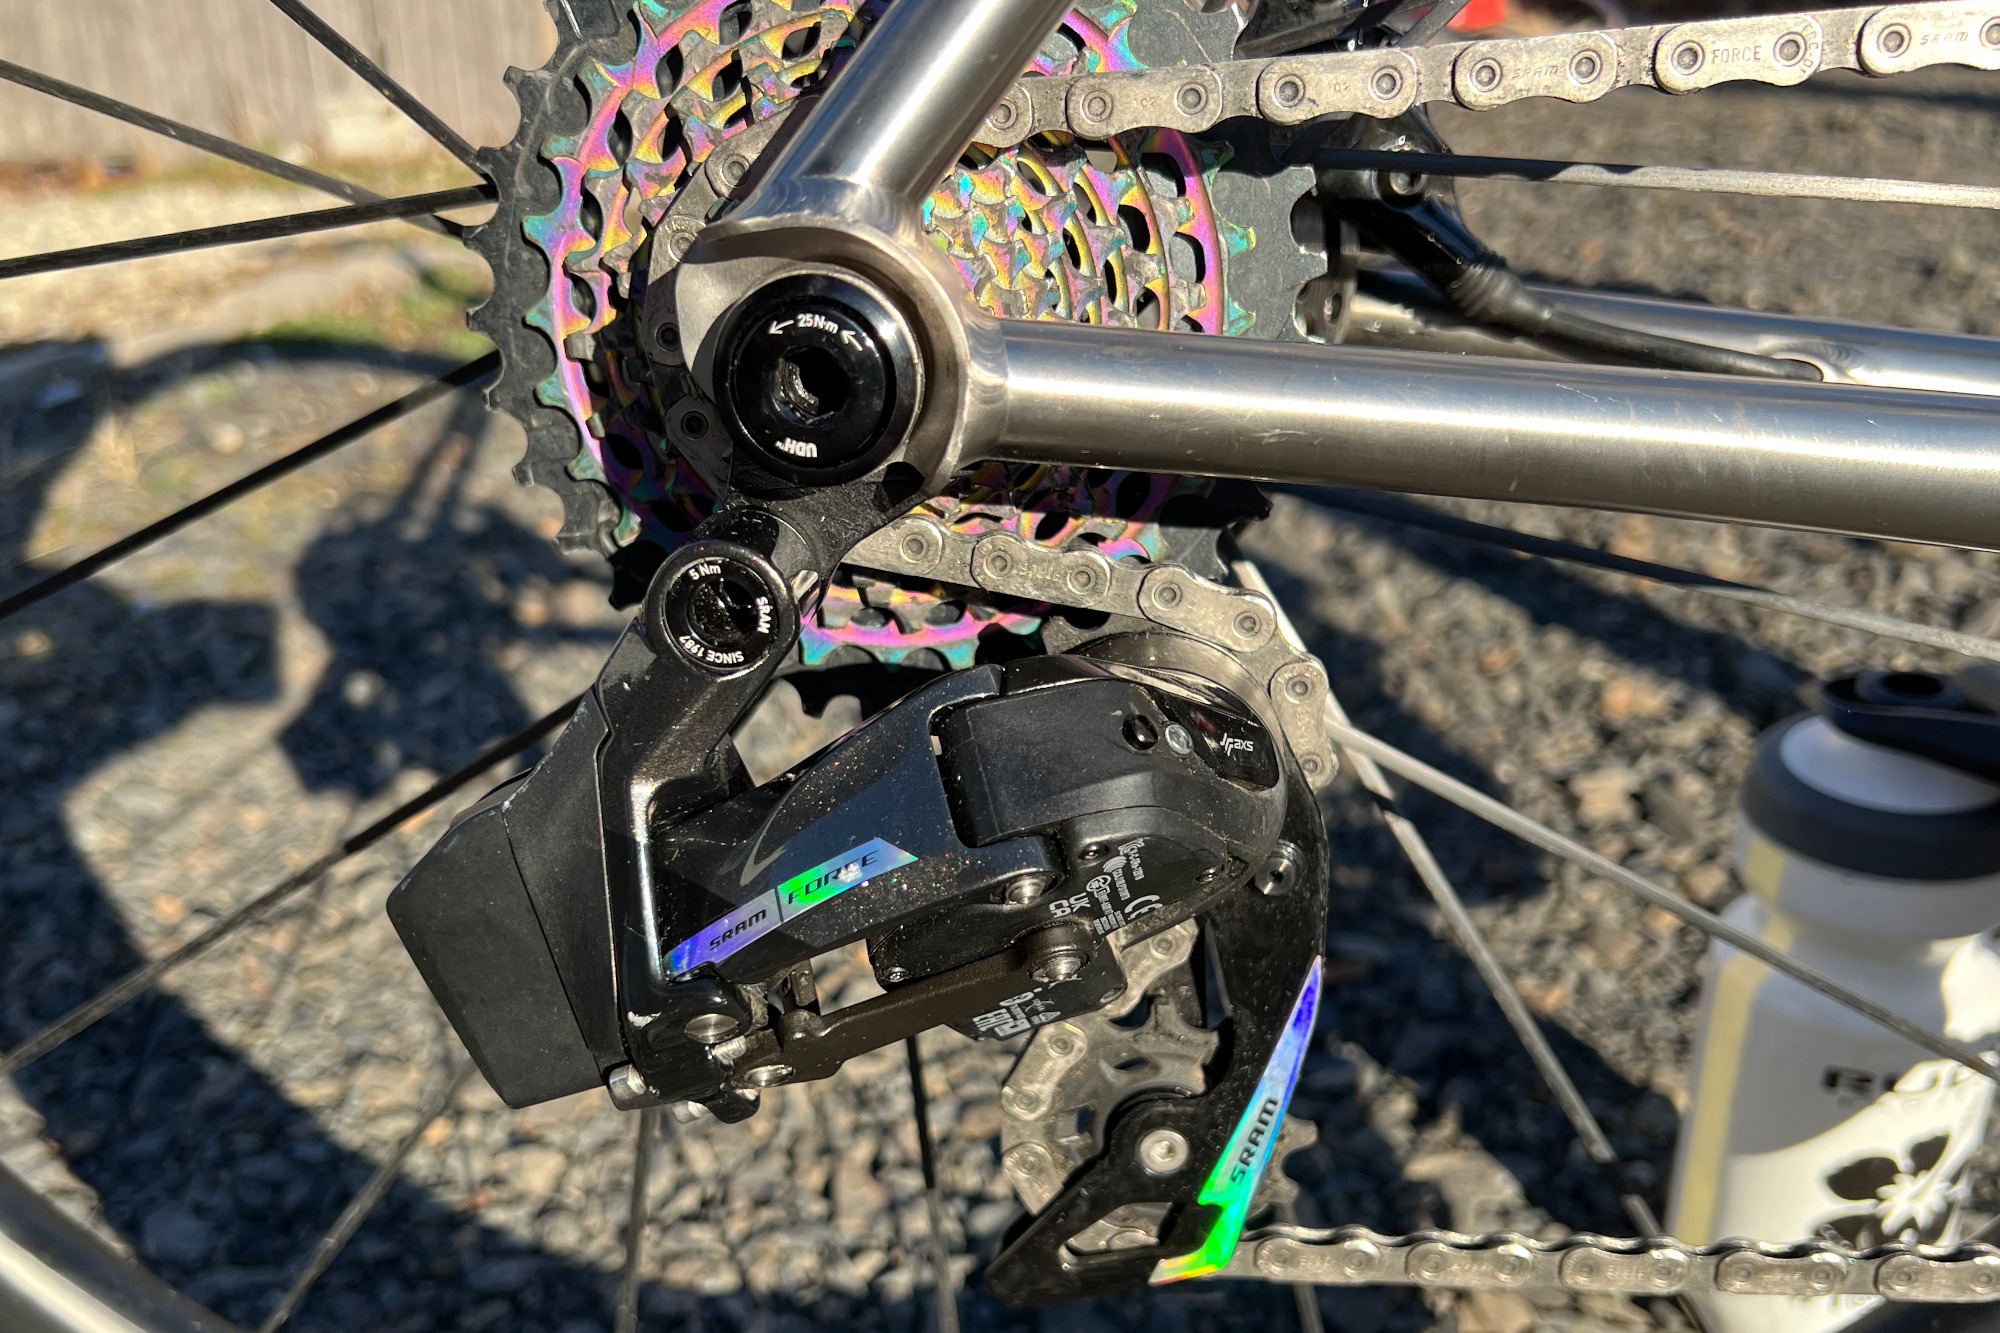 Blackheart Bike Co's Road Ti reviewed: The rainbow finish on the SRAM drivetrain was almost bling enough to distract from the minimal, clean welds at the rear dropouts.